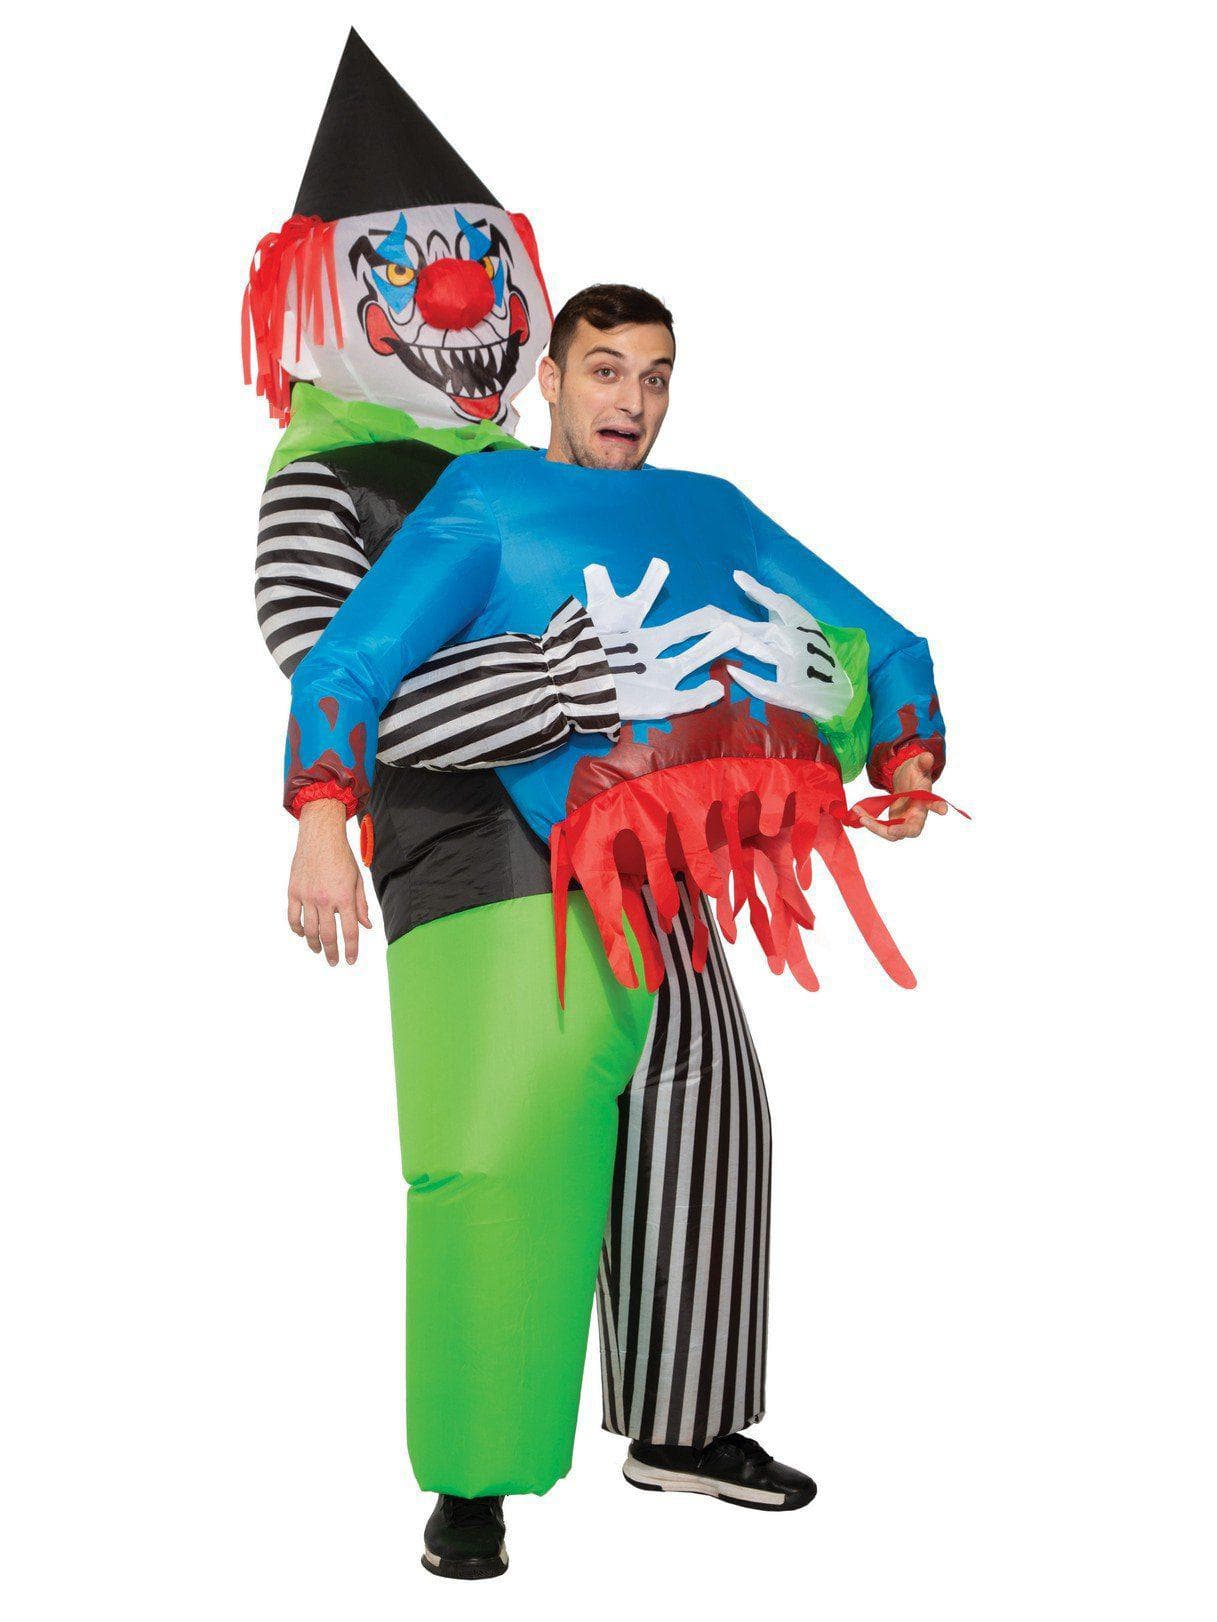 Adult Inflatable Evil Clown with Victim Costume - costumes.com